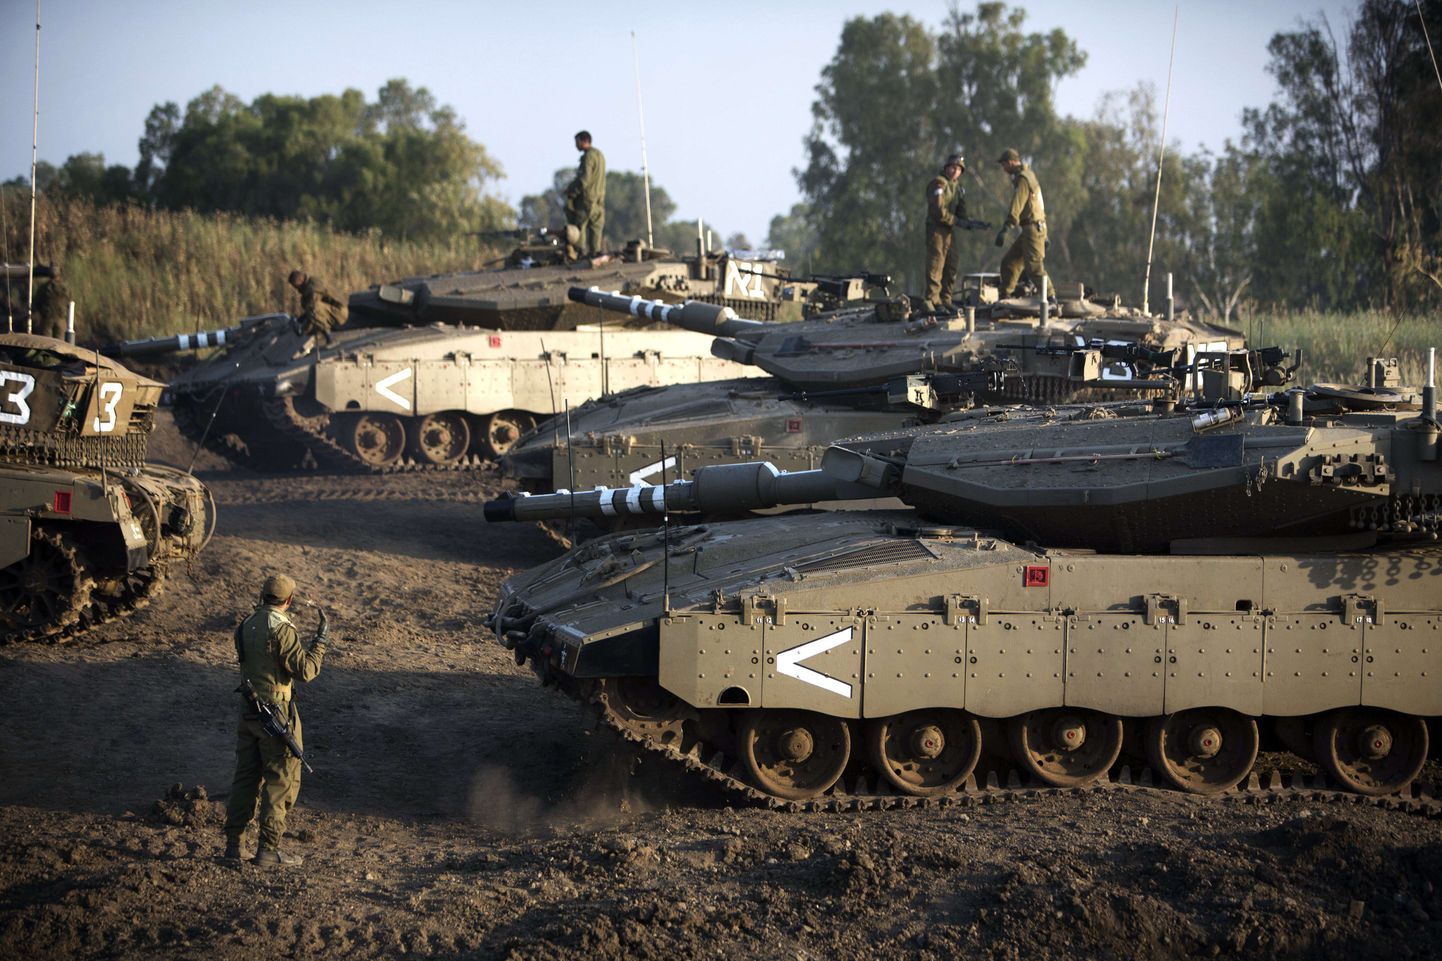 TOPSHOTS
Israeli soldiers are seen with their Merkava tank unit deployed in the Israeli annexed Golan Heights near the border with Syria, on May 6, 2013. UN chief Ban Ki-moon has appealed for restraint after Israeli air strikes on targets near Damascus which prompted Syrian officials to warn "missiles are ready" to retaliate.   AFP PHOTO/MENAHEM KAHANA